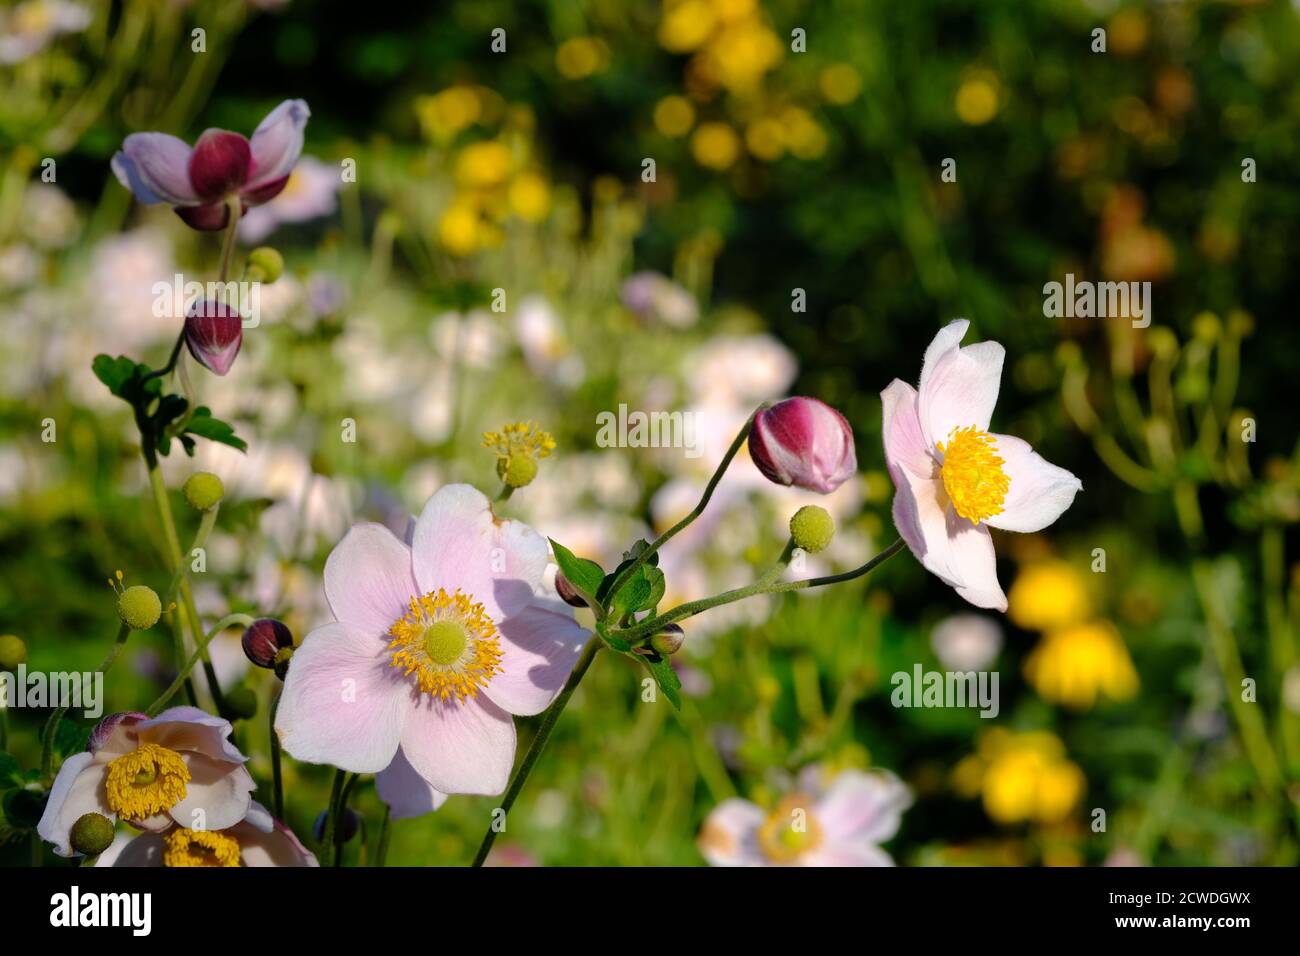 Late blooming pale pink and yellow Japanese anemone (Anemone hupehensis) flowers and buds in a park, Ottawa, Ontario, Canada. Stock Photo